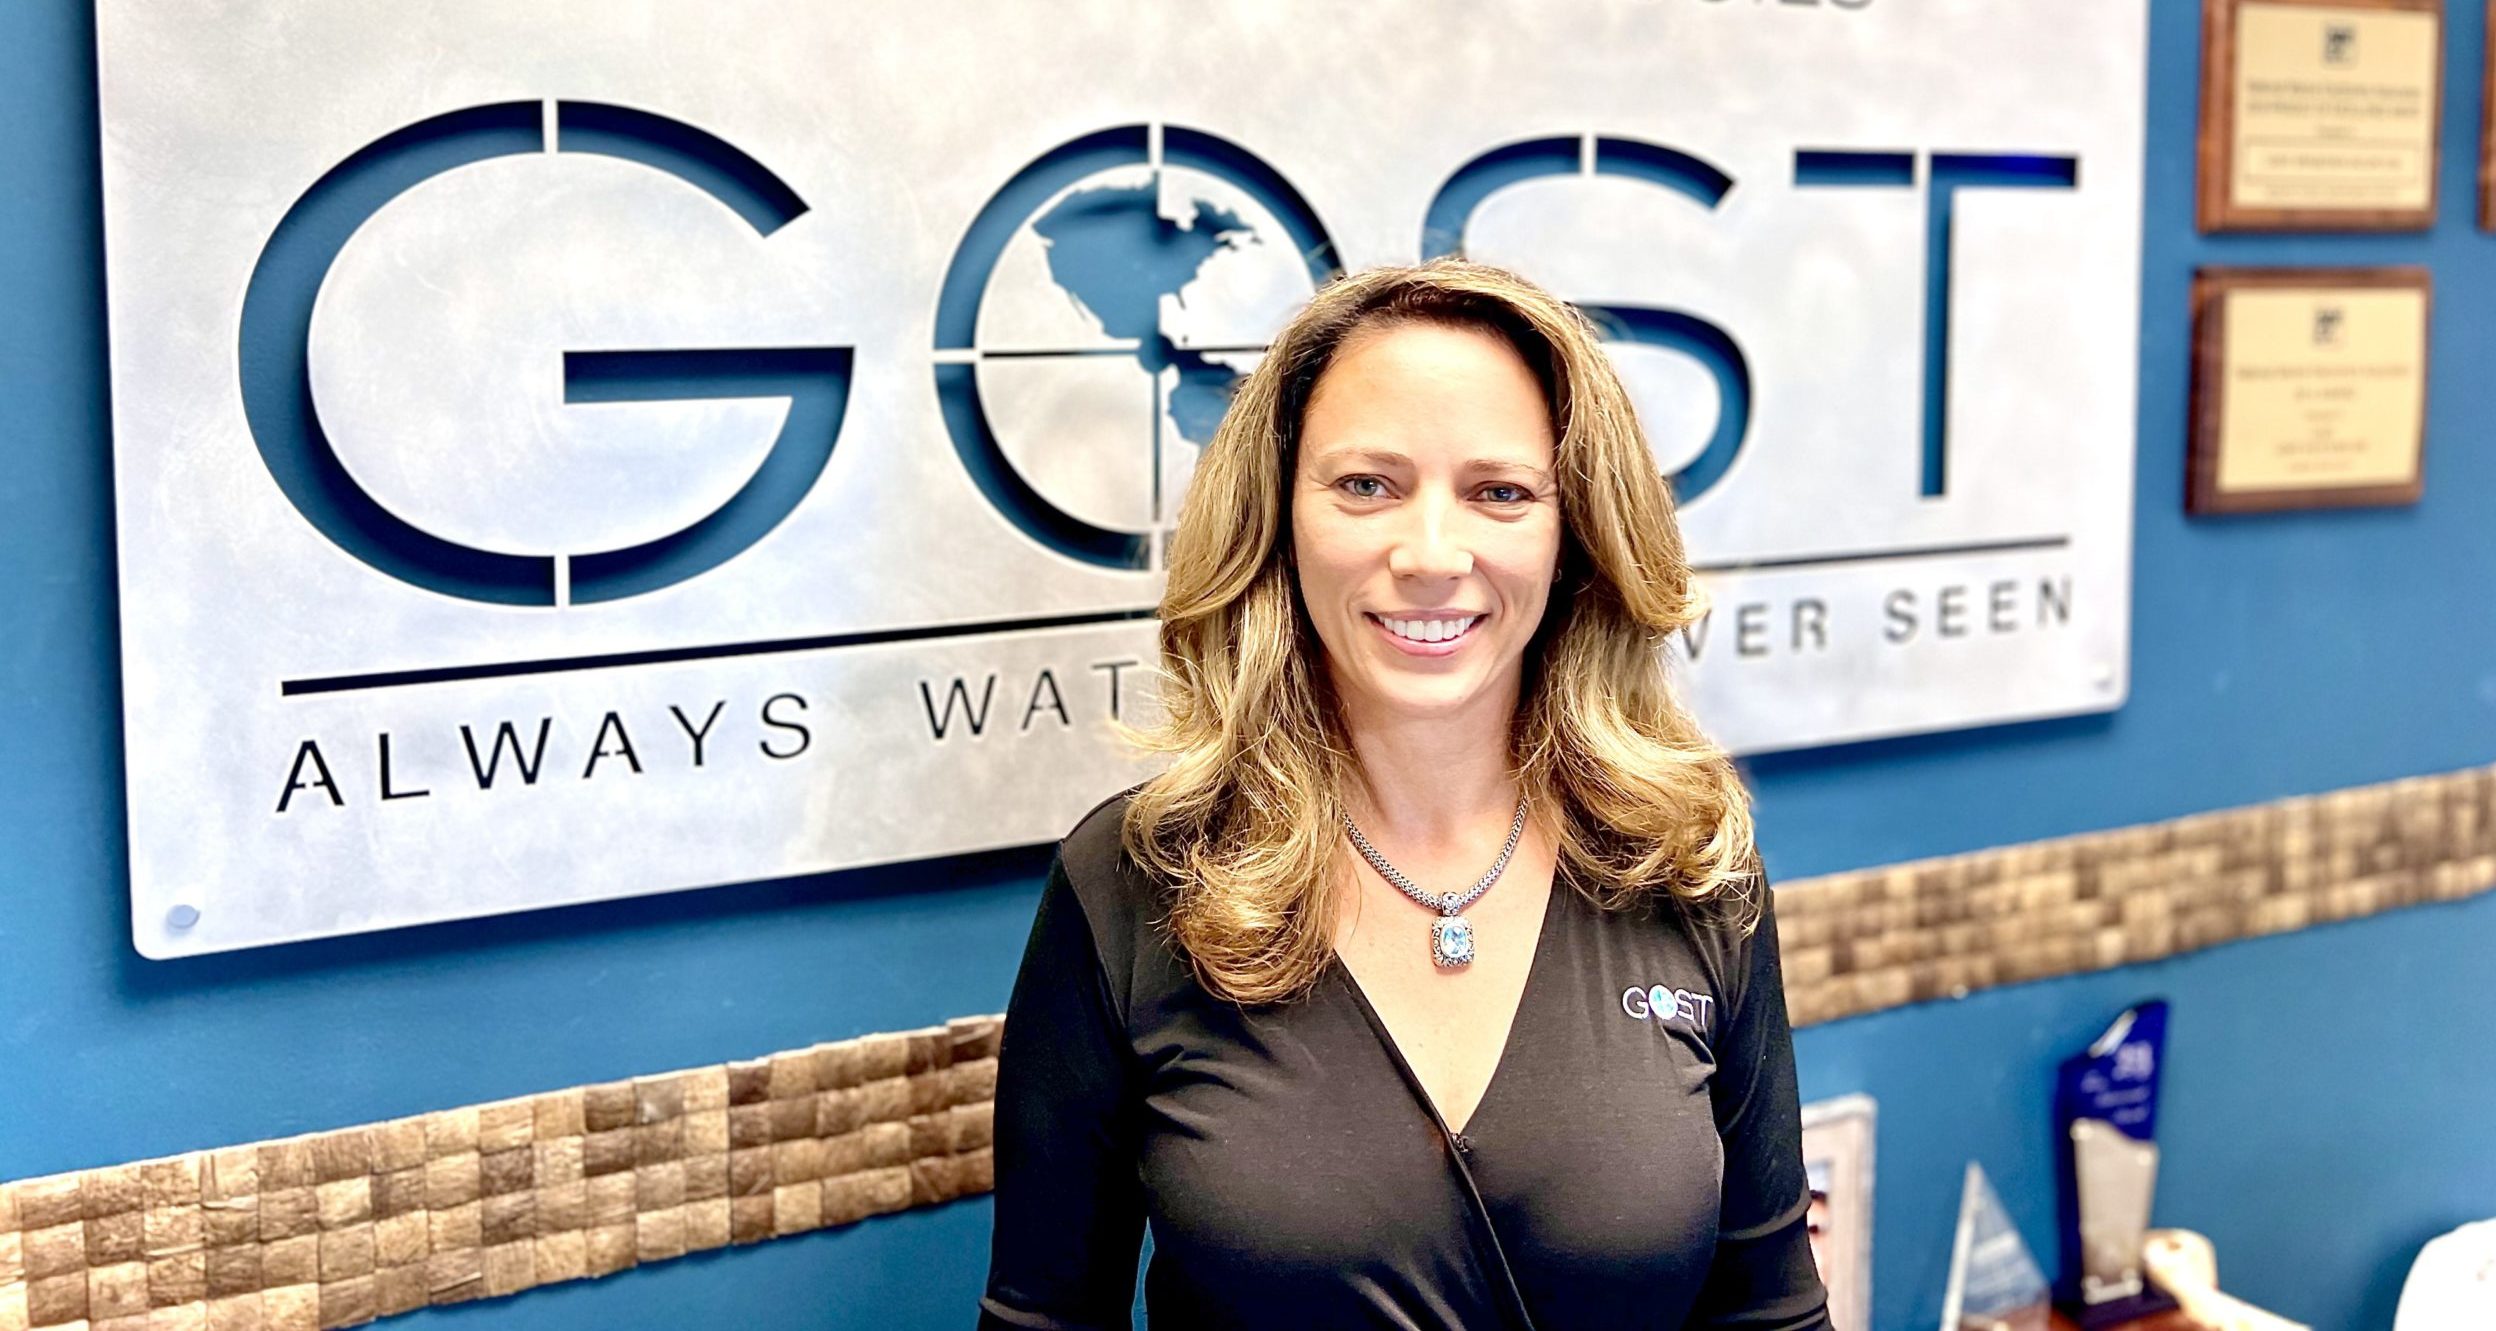 GOST names new sales and marketing coordinator